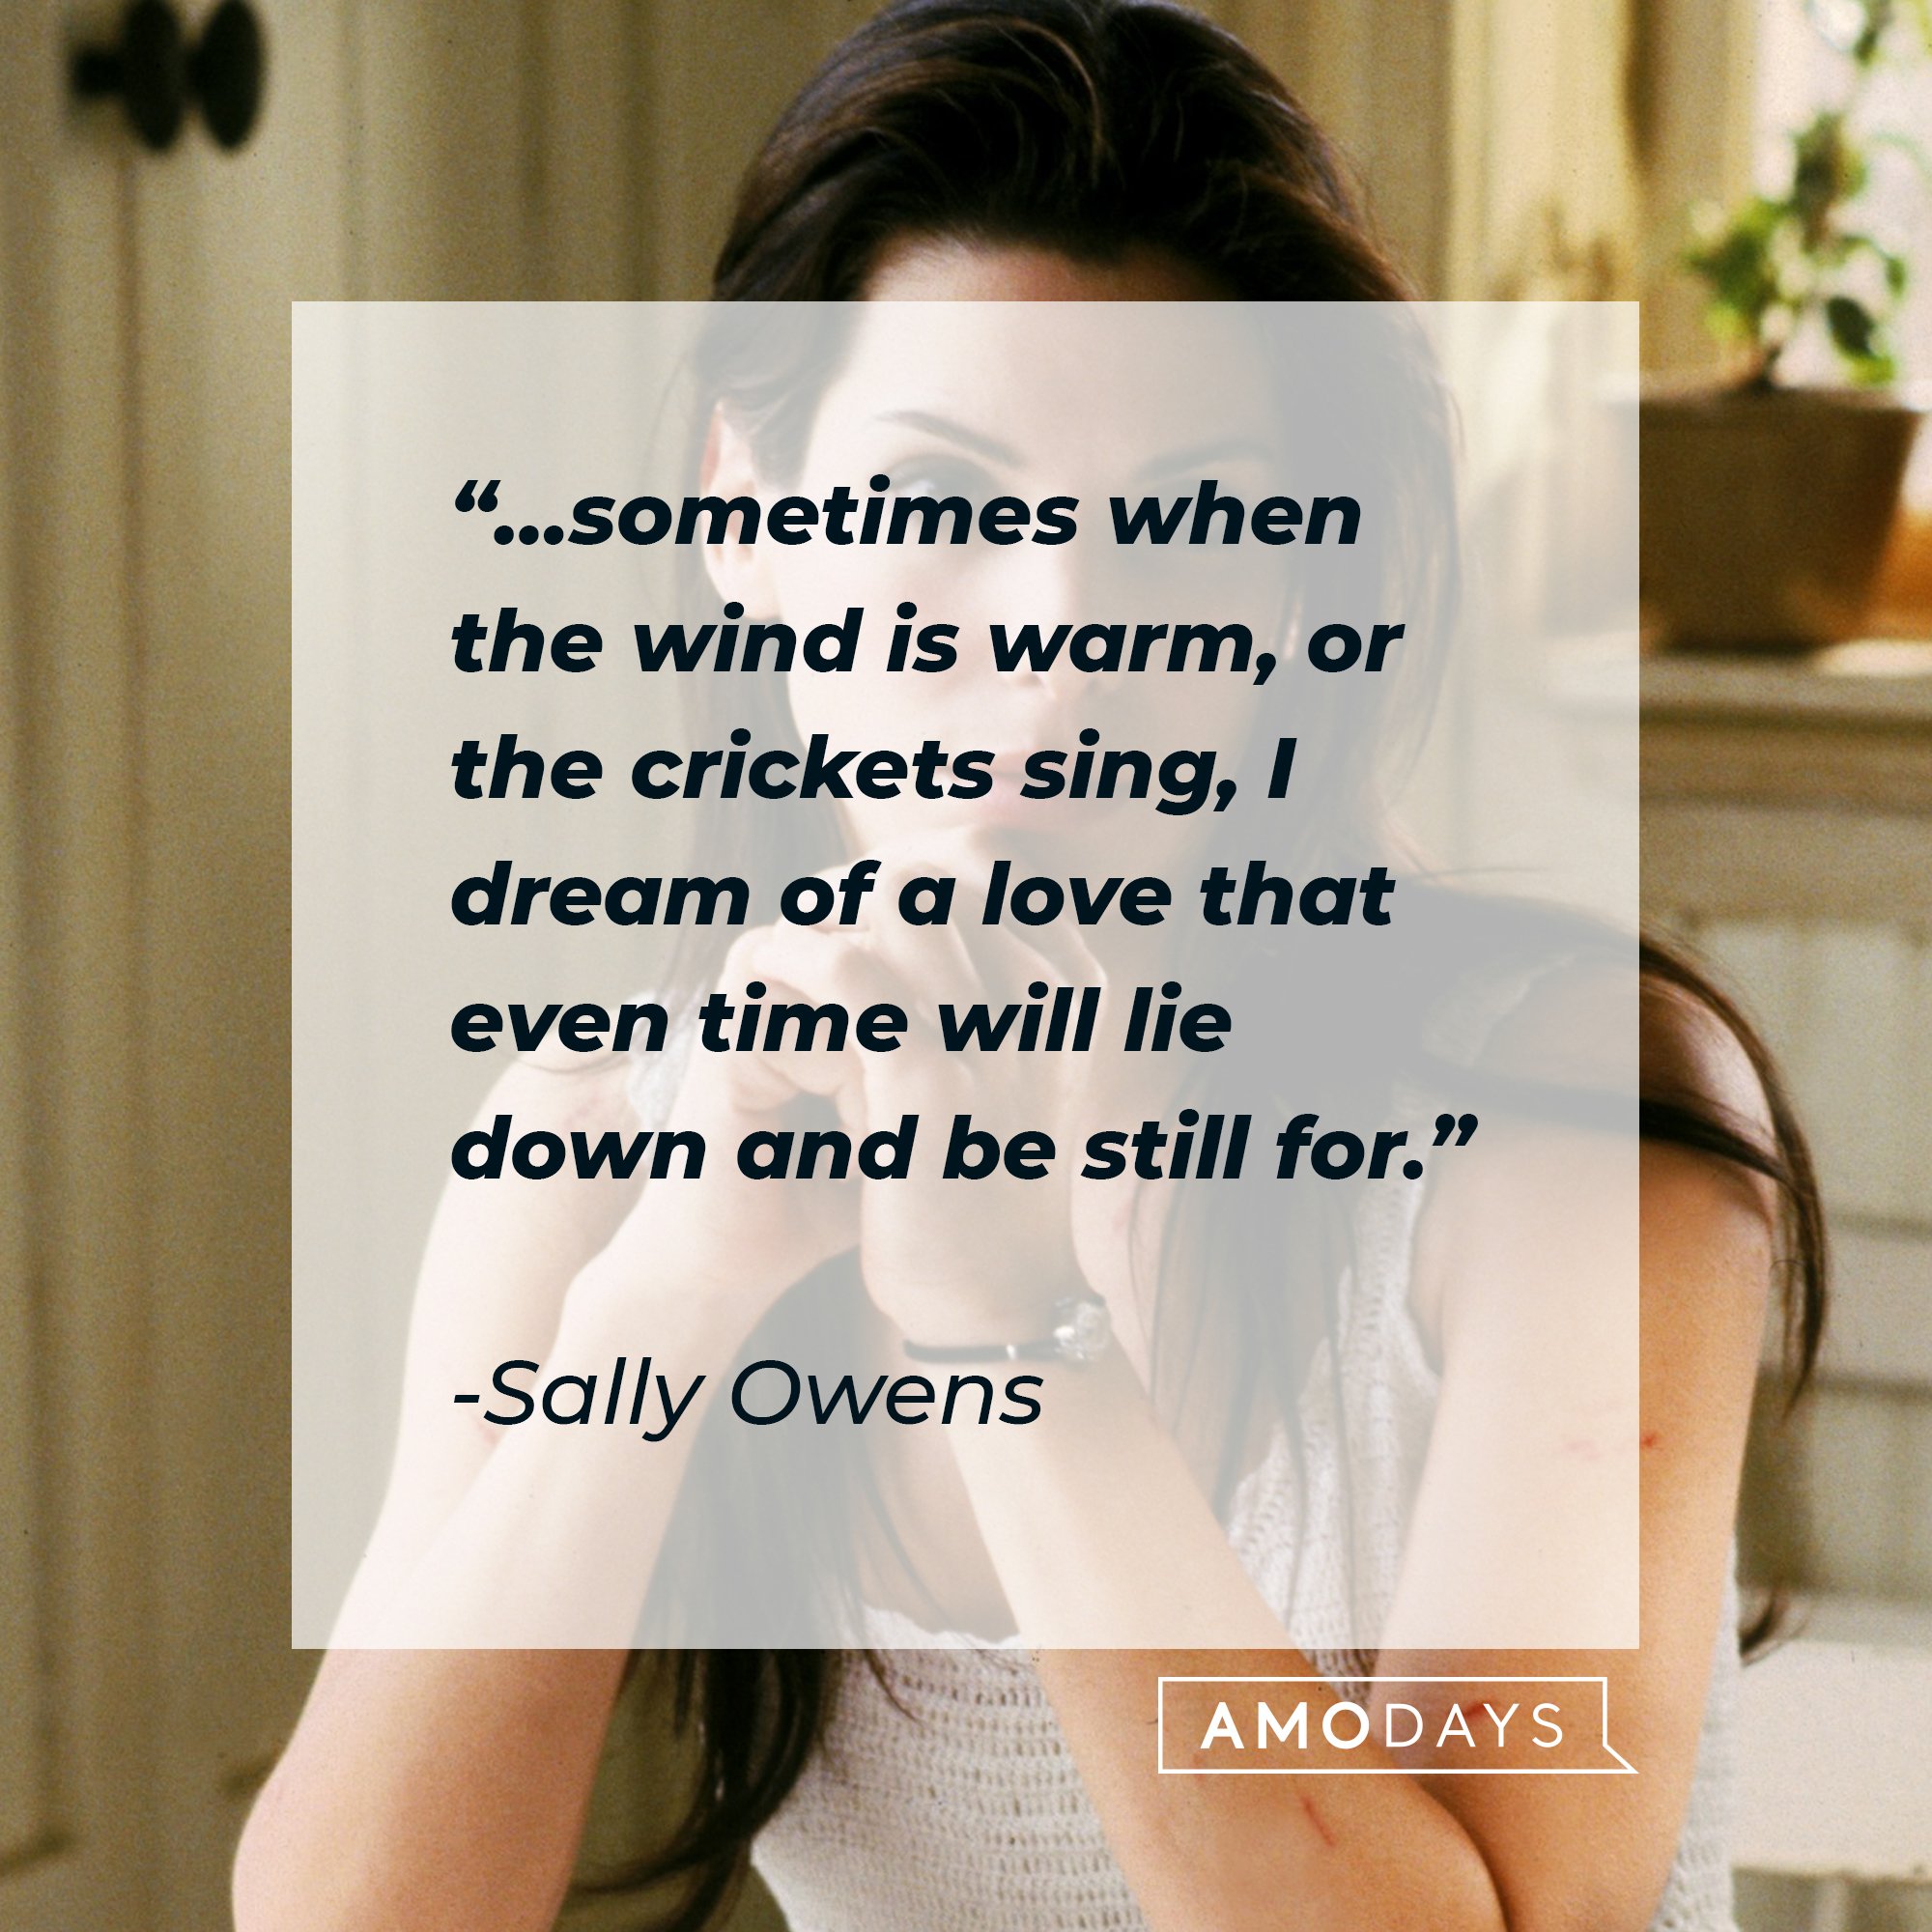 Sally Owens' quote: "… sometimes, when the wind is warm, or the crickets sing I dream of a love that even time will lie down and be still for." | Image: AmoDays